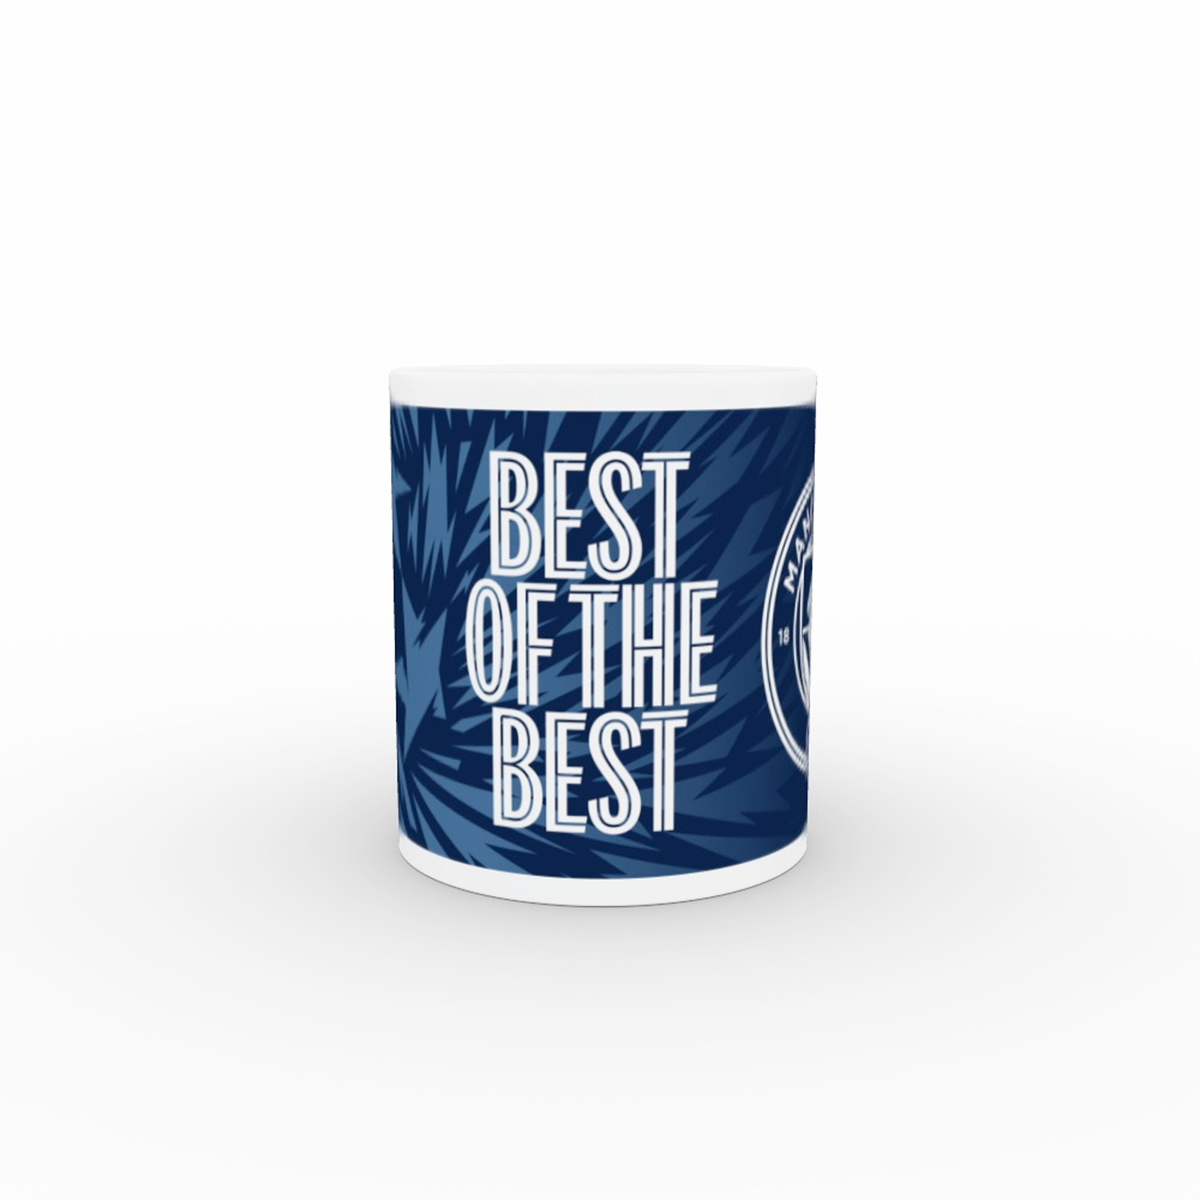 Champions League Manchester City 'Best of the Best' Mug